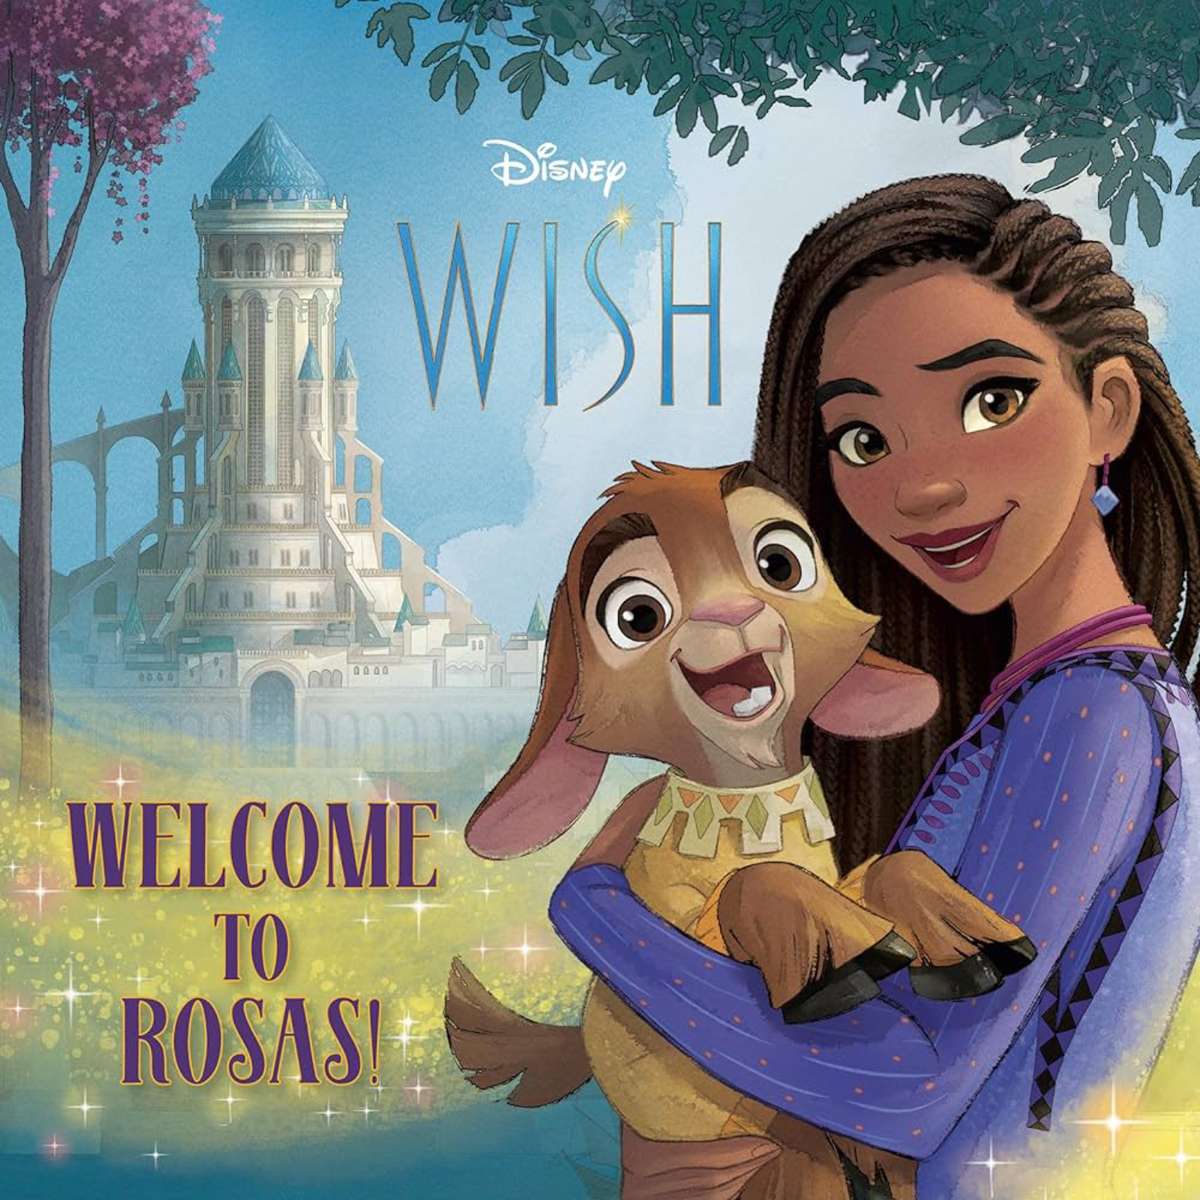 Welcome to Rosas! (Disney Wish) book cover online puzzle